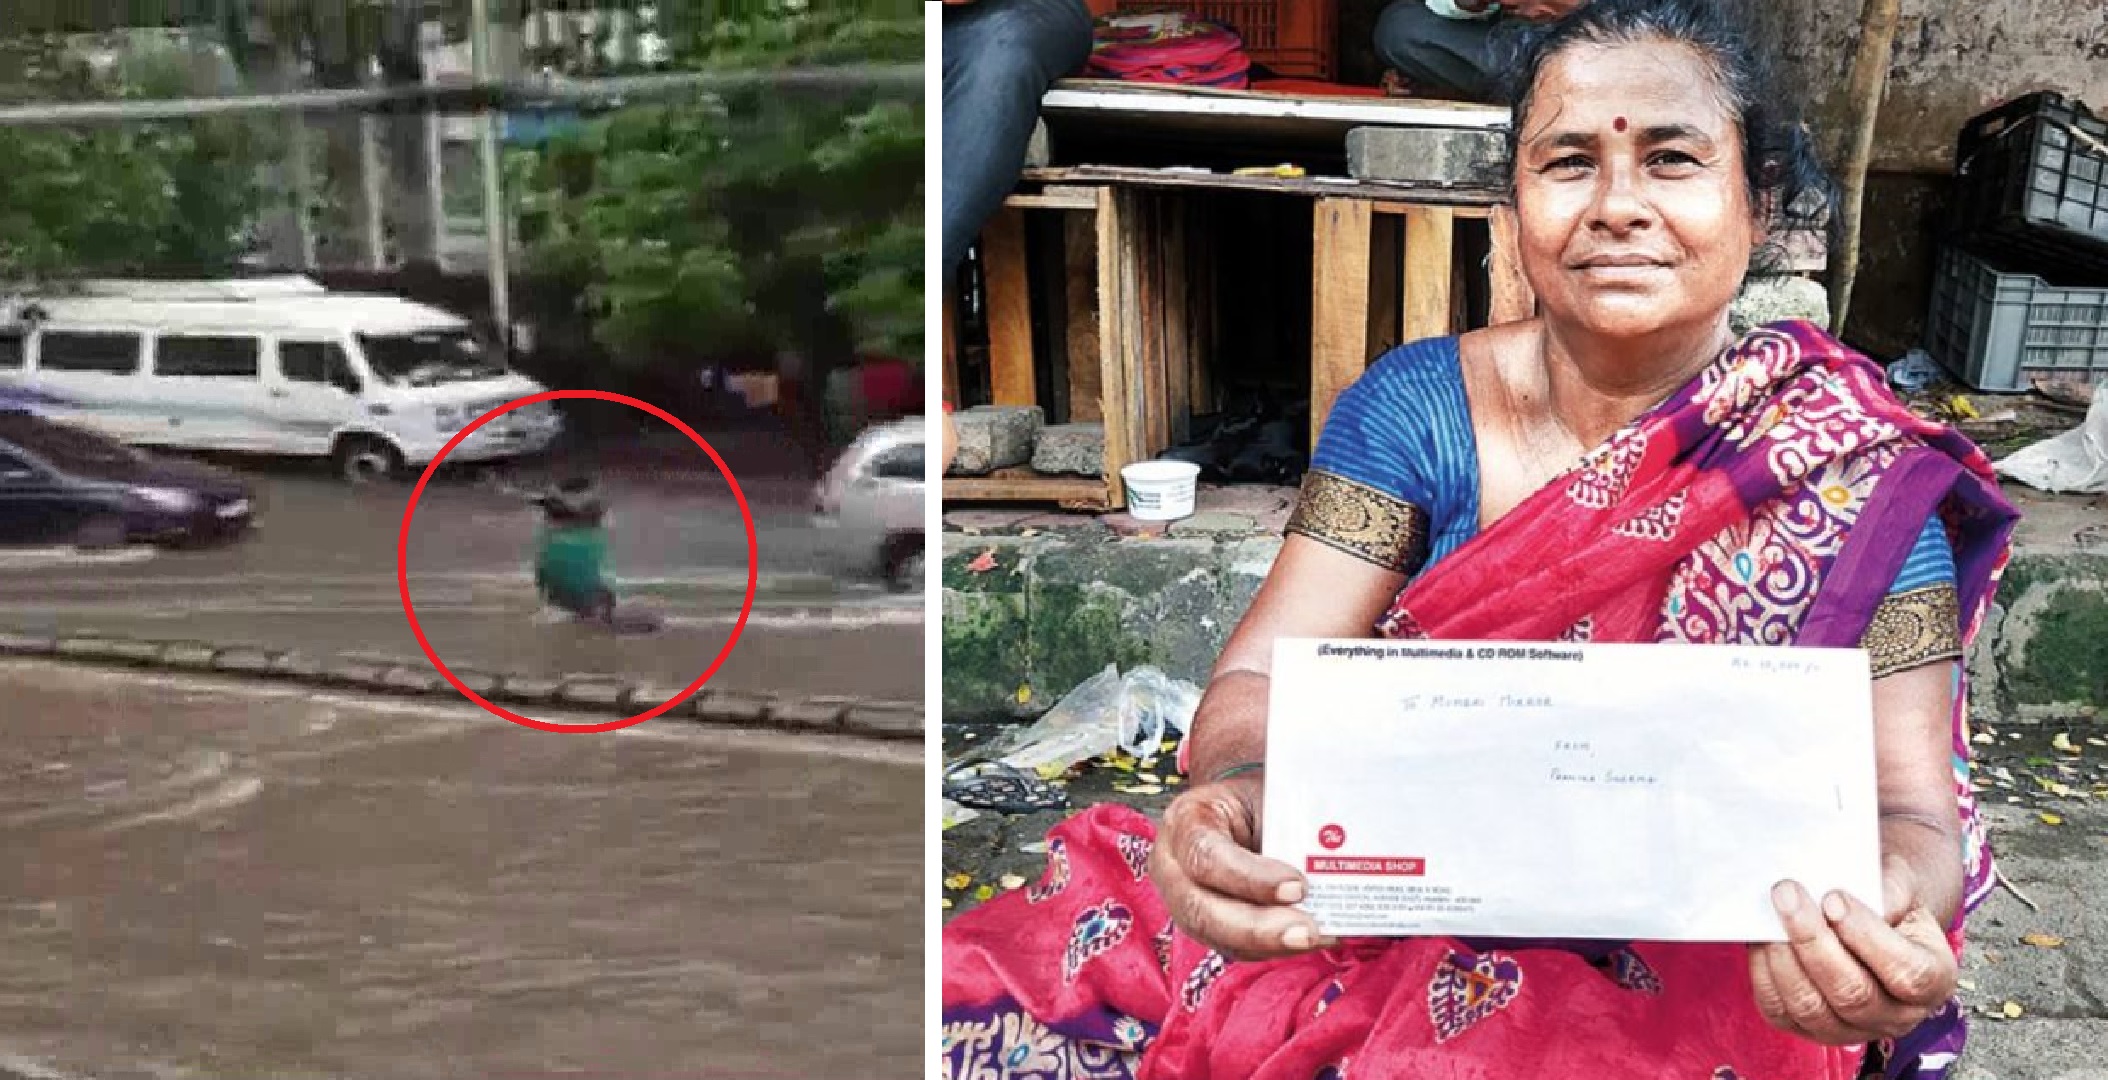 Mumbai Woman Who Stood In Rain To Warn Commuters Of Open Manhole, Gets Rs 1.5 Lakhs Raised For Her